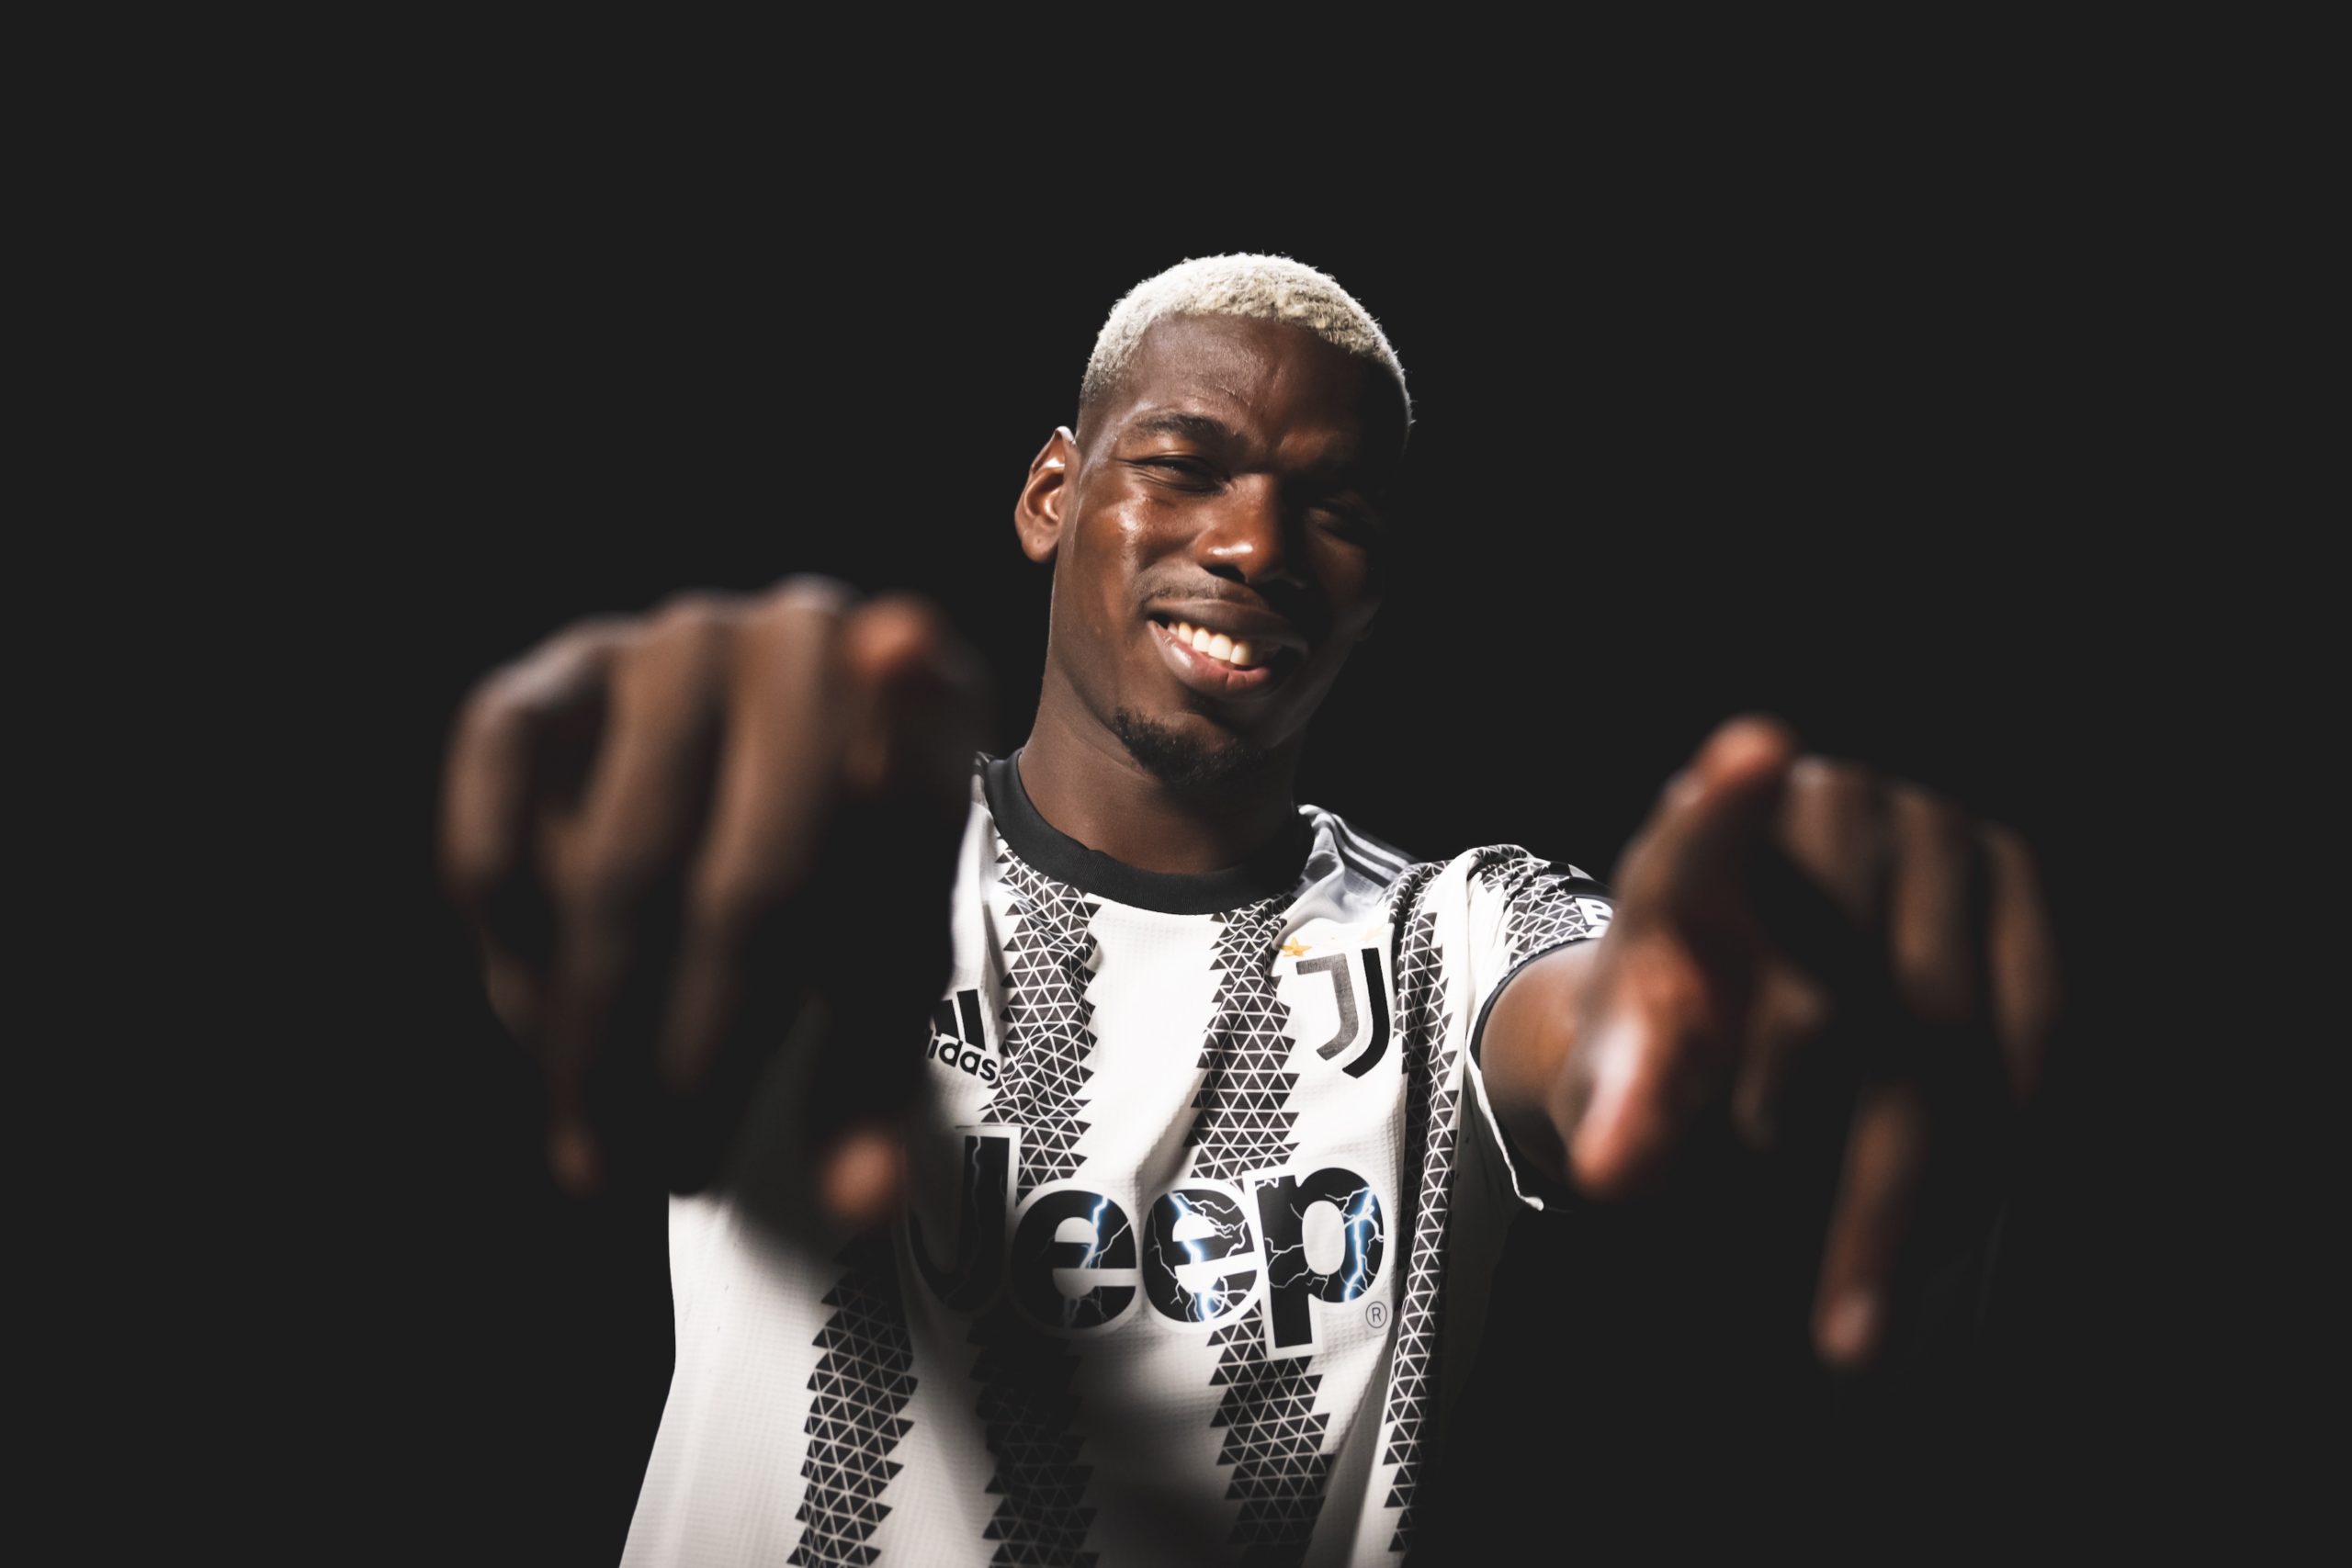 Paul Pogba has completed his return to Juventus on a free transfer following the expiry of his contract at Manchester United this summer